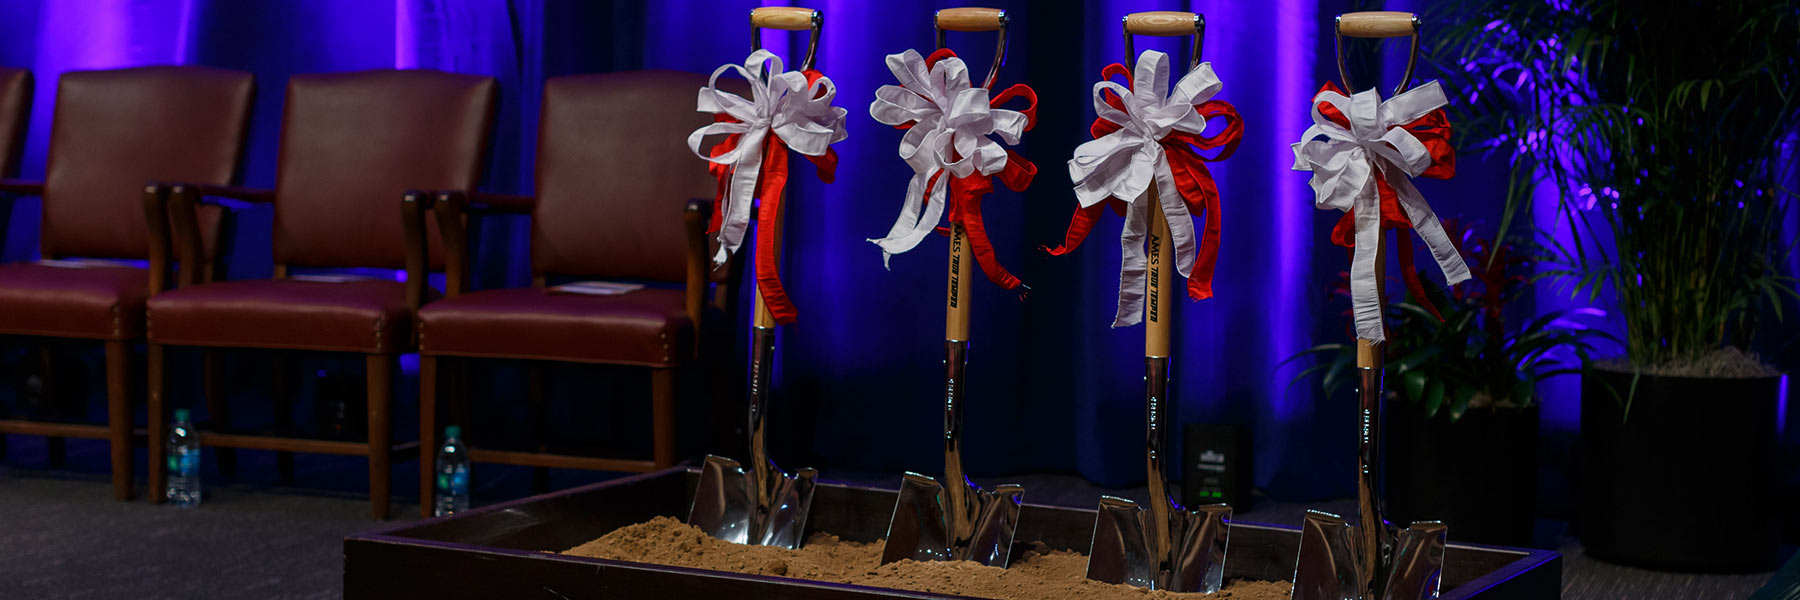 Four shovels with white and red bows stand in a box of dirt awaiting the start of a groundbreaking ceremony.